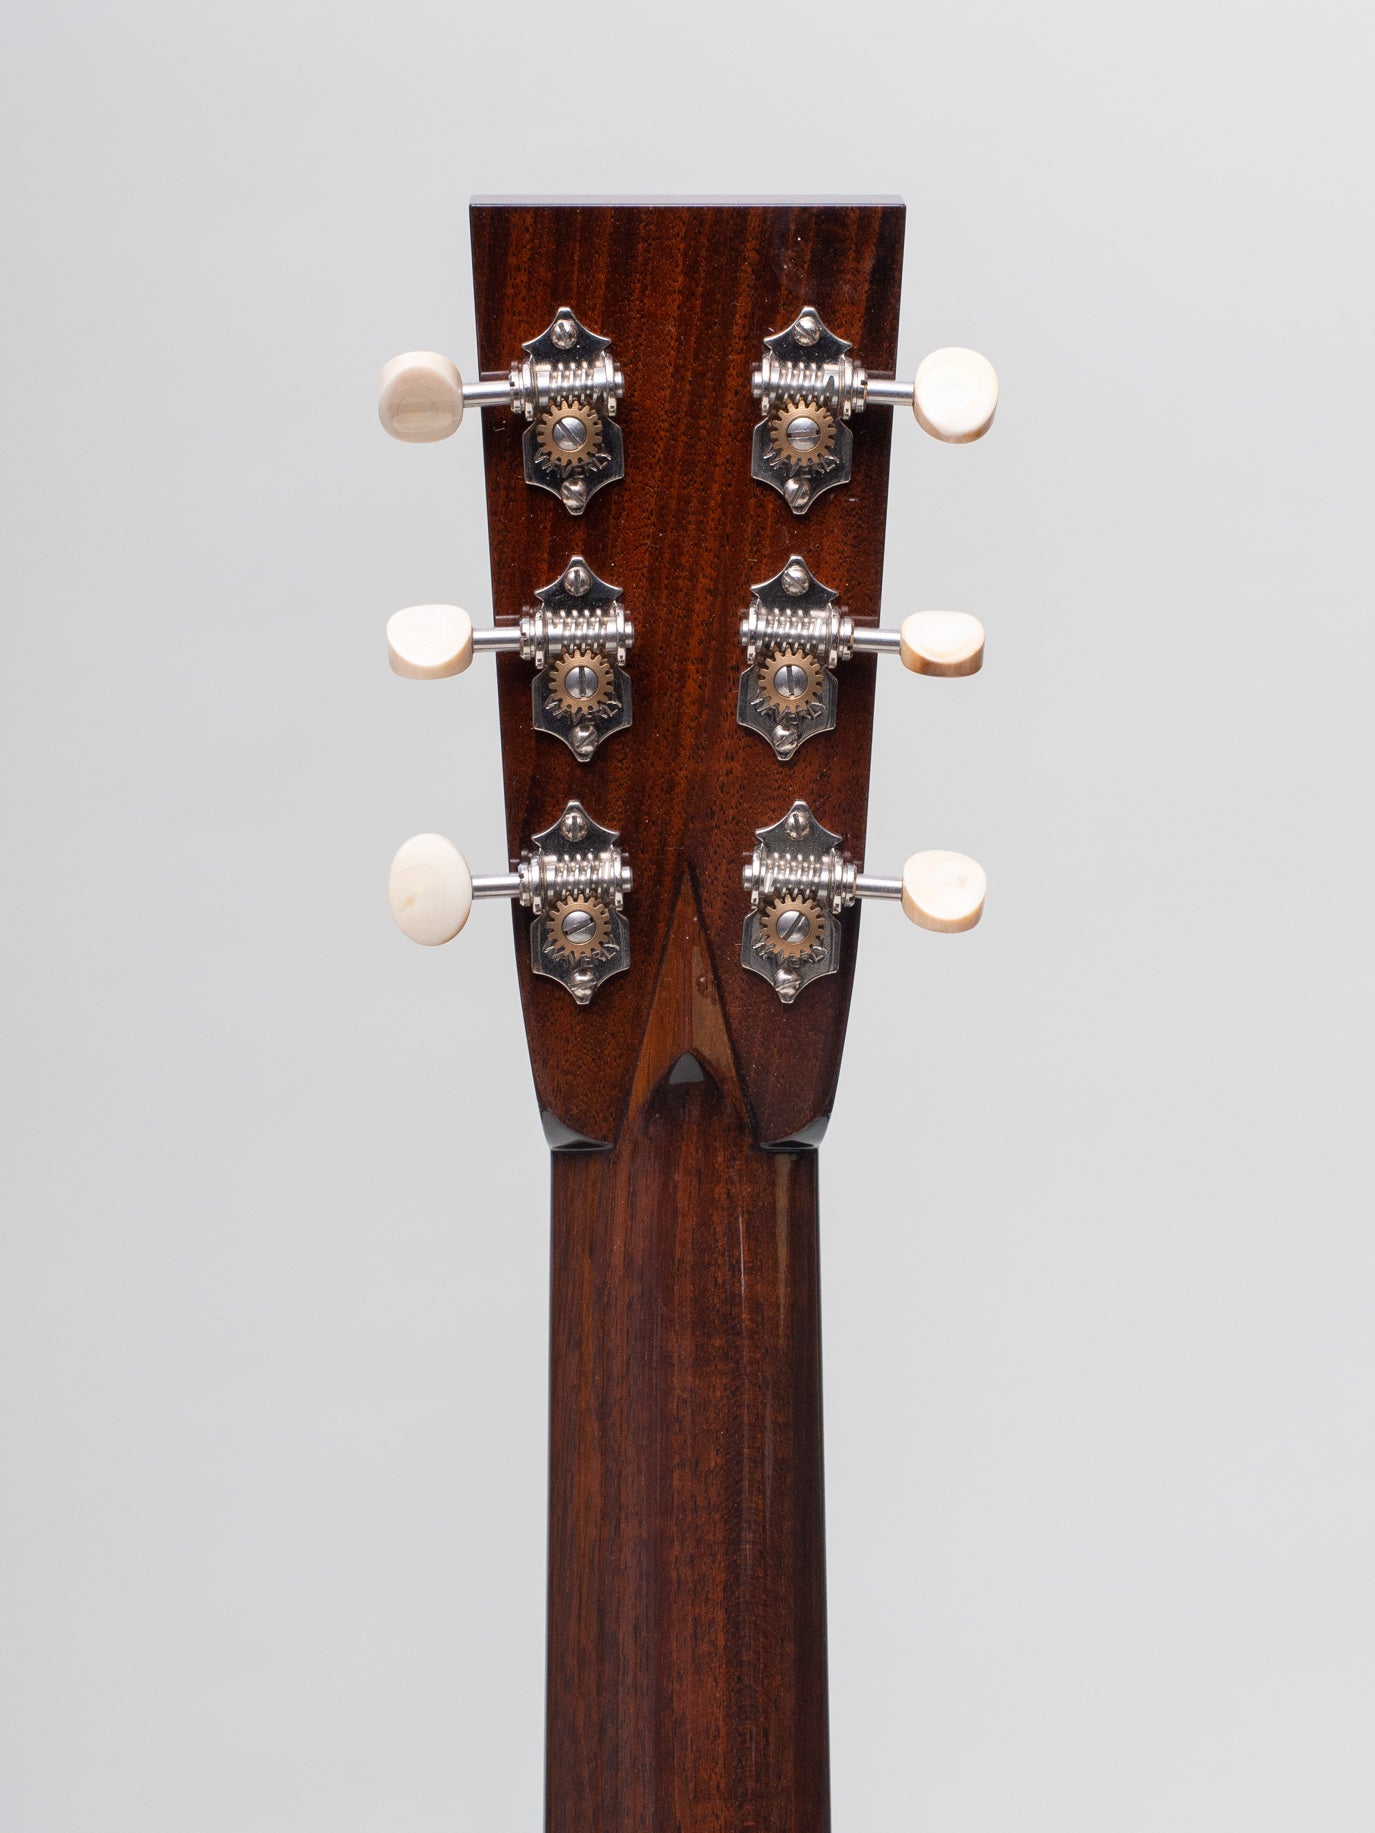 2017 Collings Baby 2-H